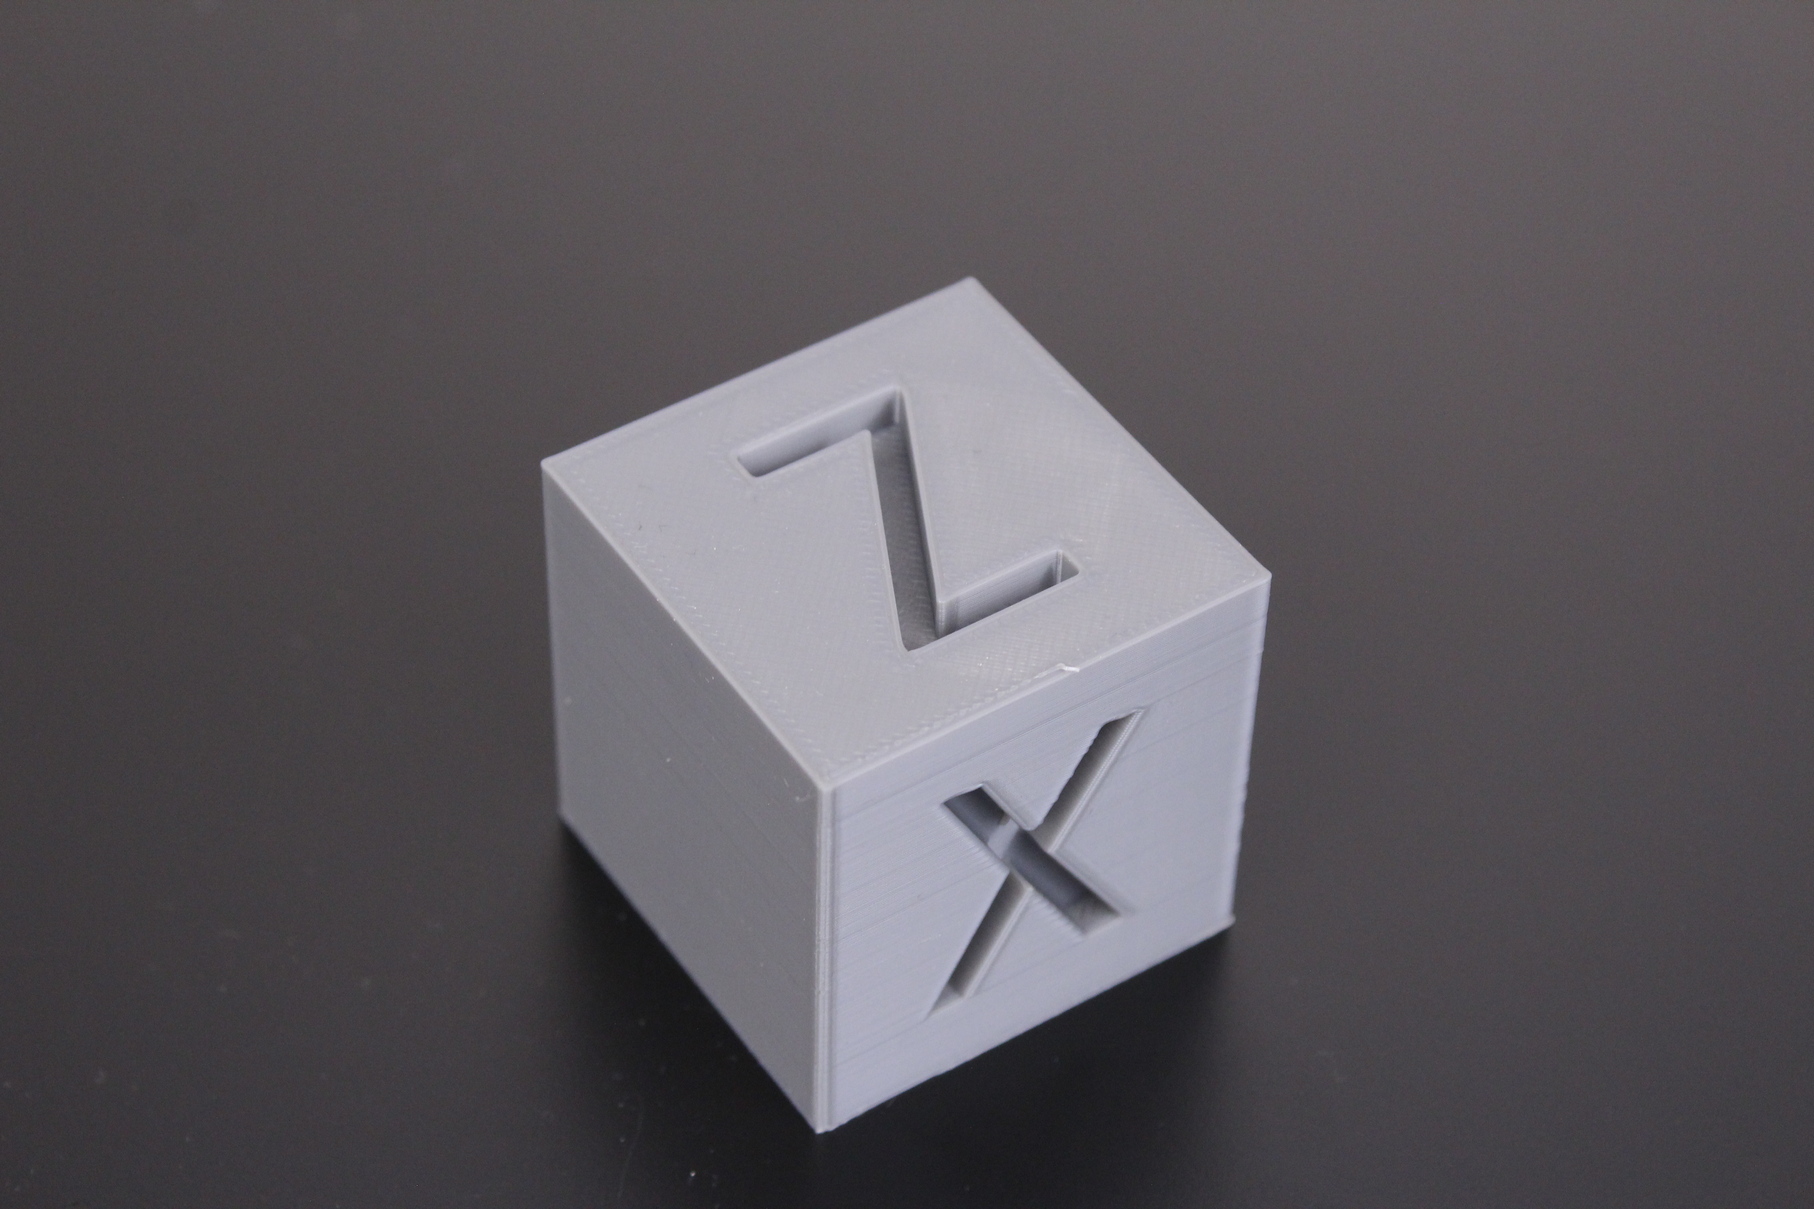 200 percent Calibration Cube printed on Voxelab Aries 6 | Voxelab Aries Review: A Worthy Upgrade for the Aquila?